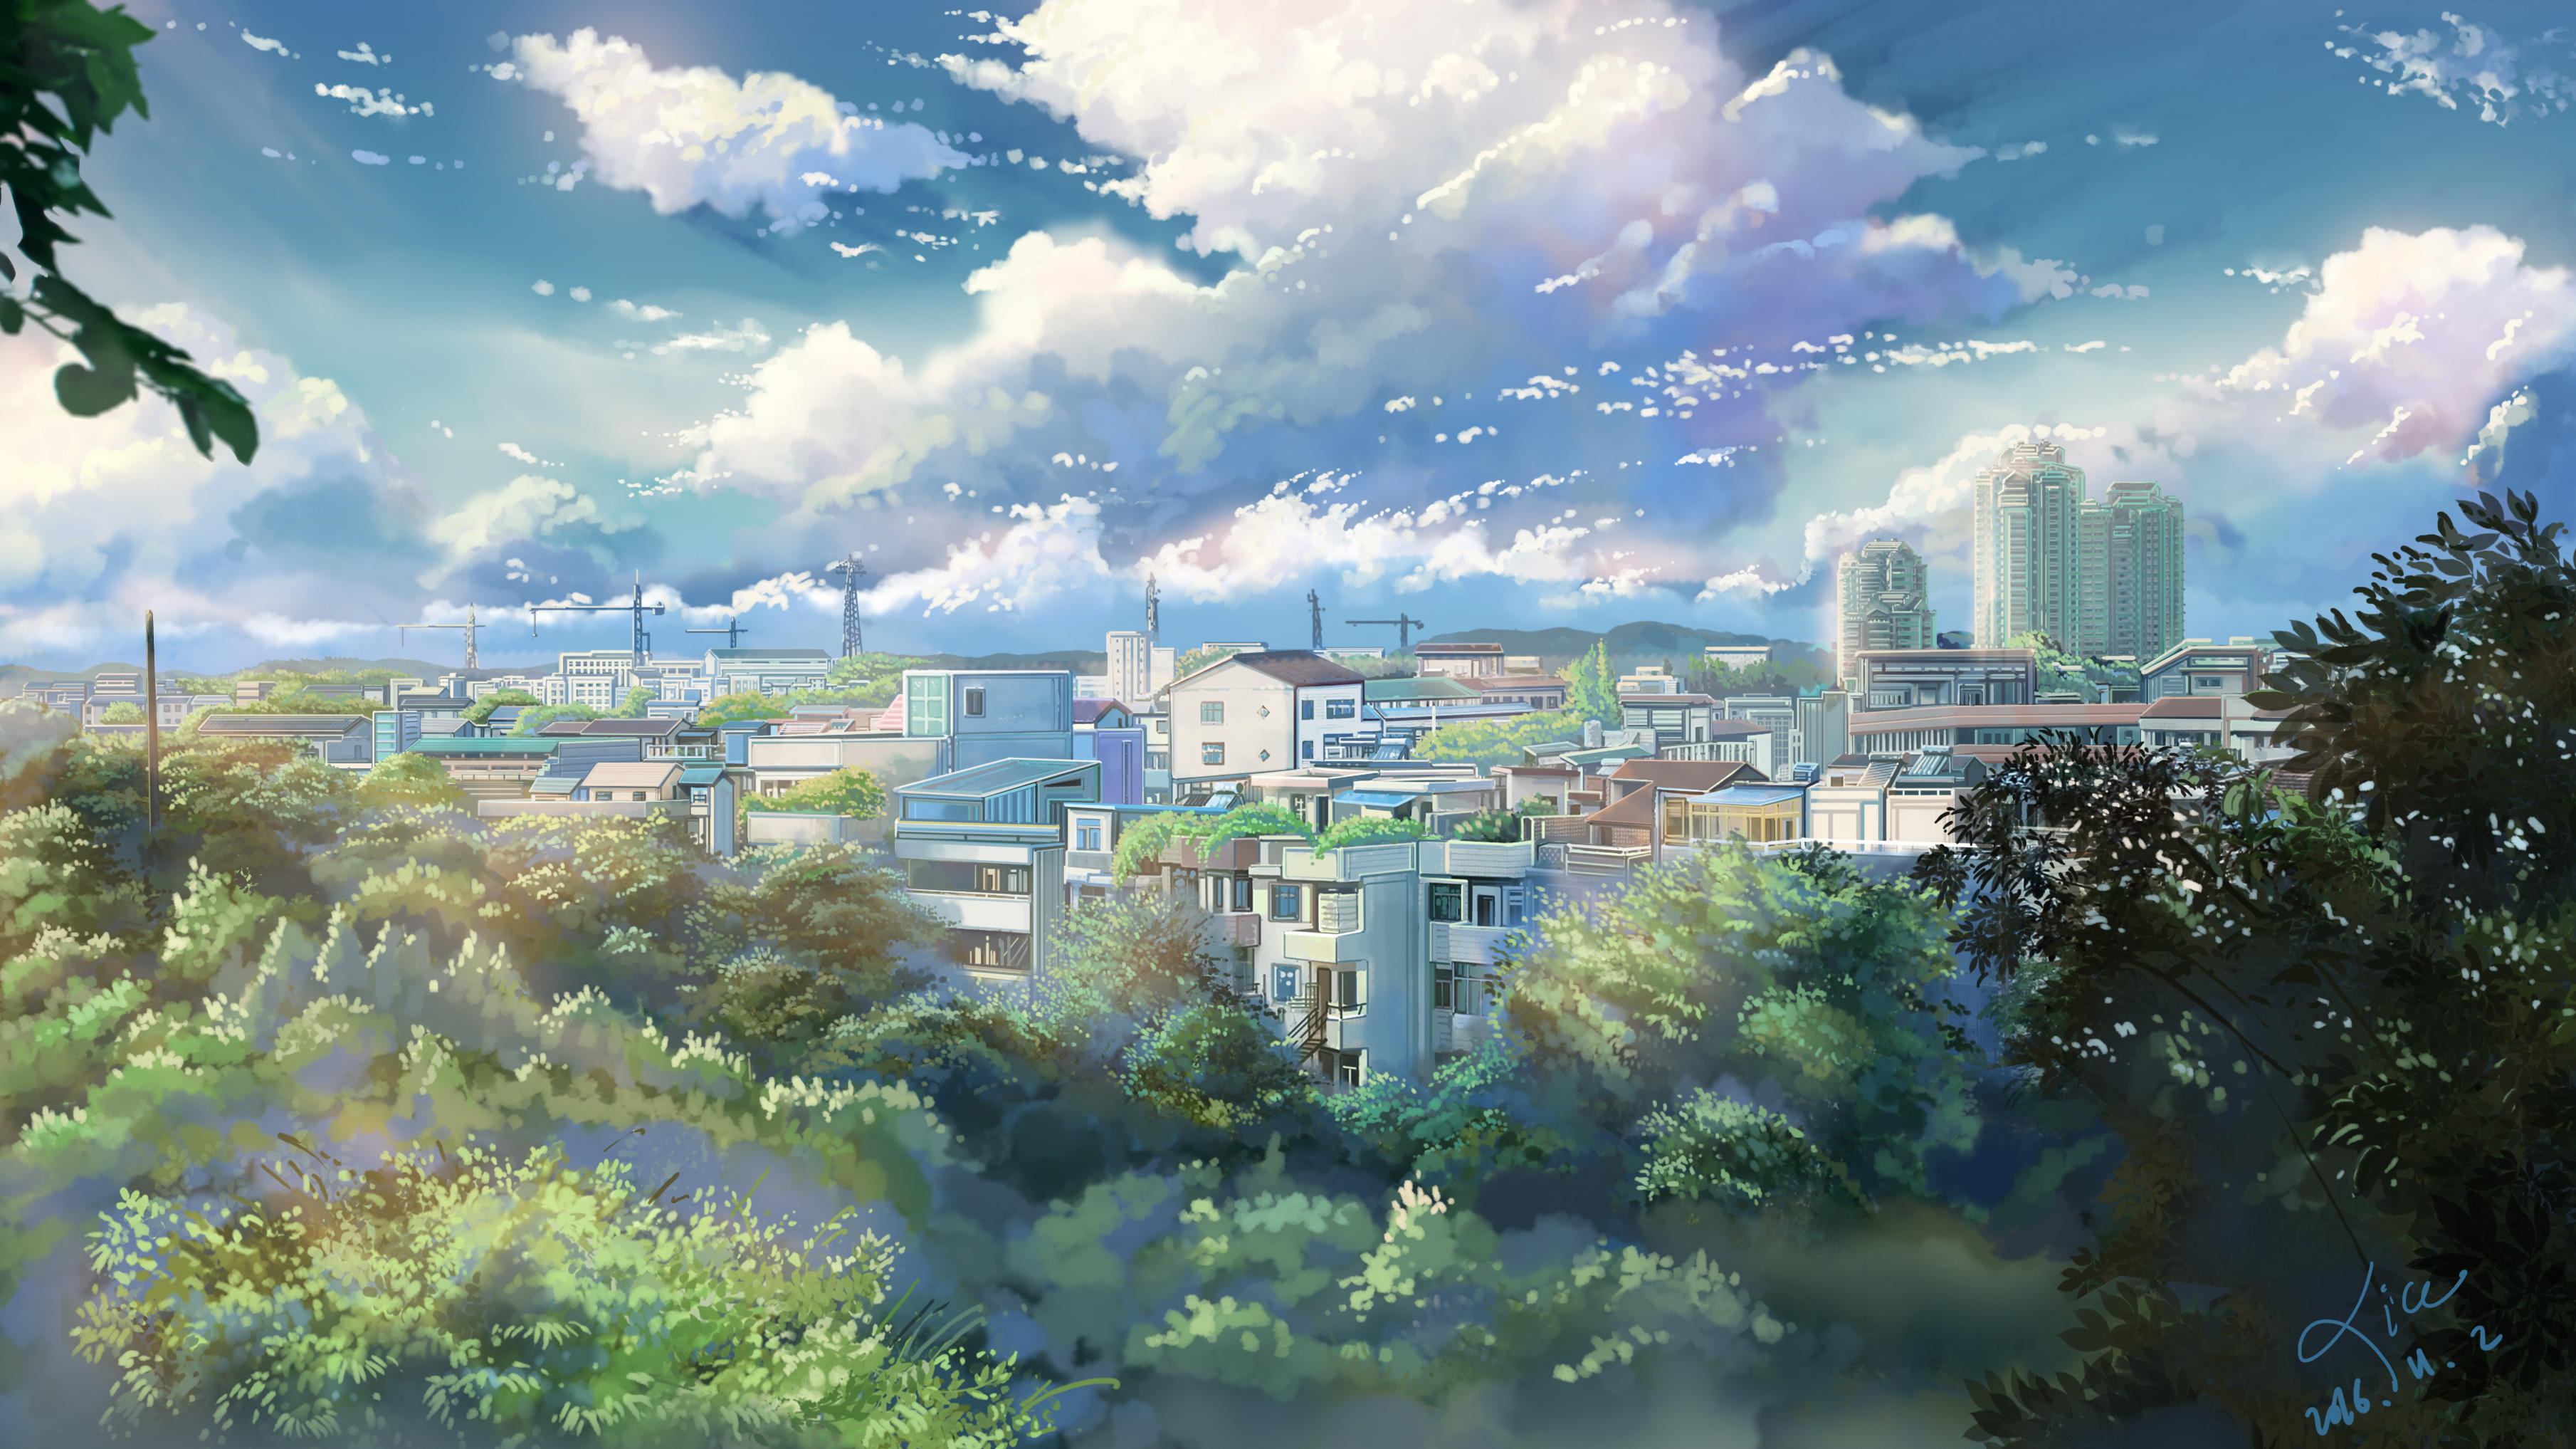 Anime 3619x2035 landscape anime cityscape outdoors sky clouds trees 2016 (Year)